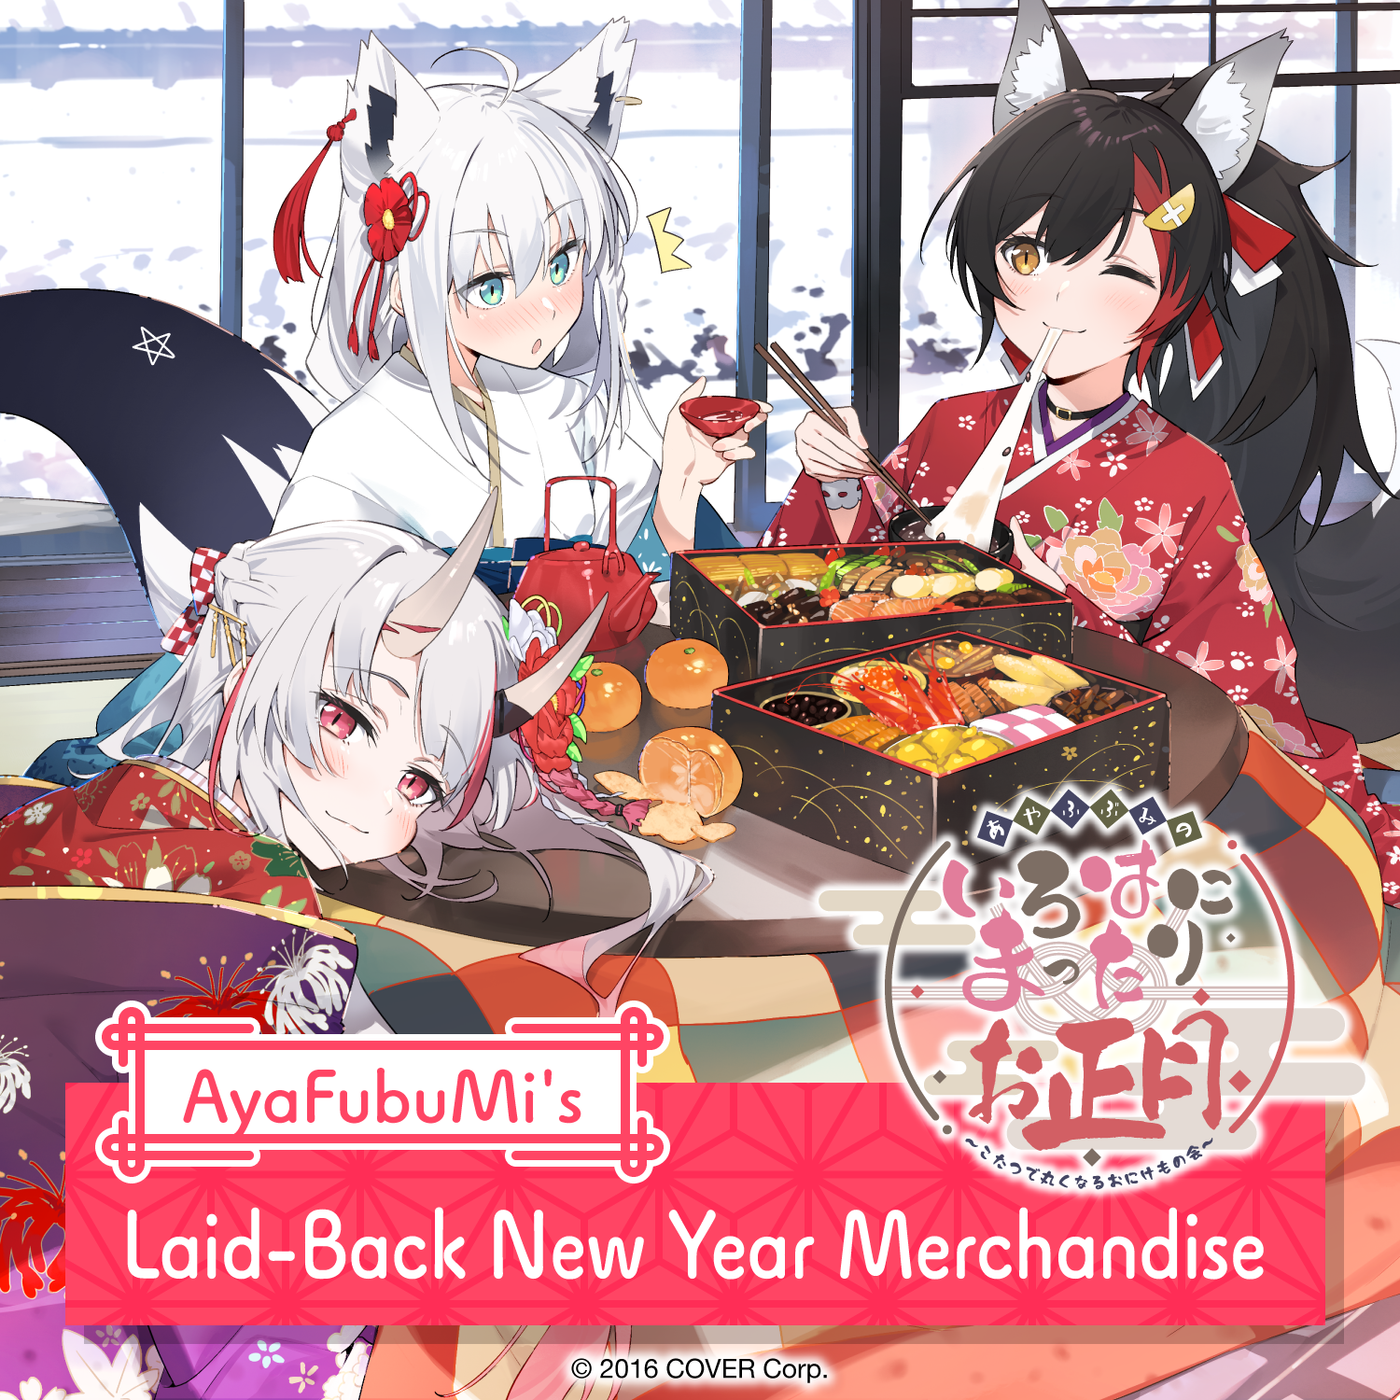 [Pre-order] "AyaFubuMi's Laid-Back New Year" Merchandise